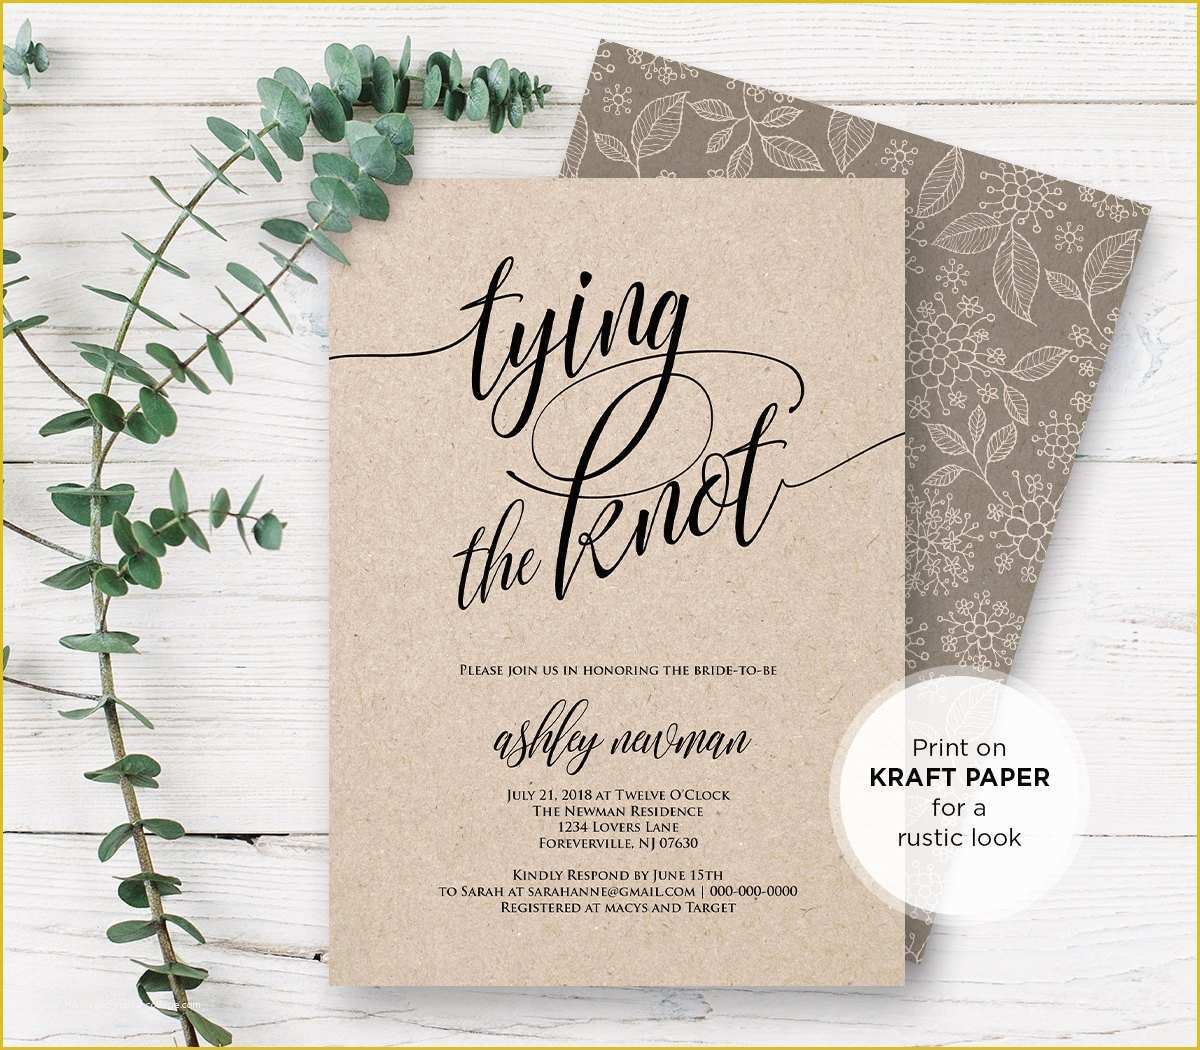 Free Printable Rustic Bridal Shower Invitation Templates Of Rustic Bridal Shower Invitation Printable Tying the Knot